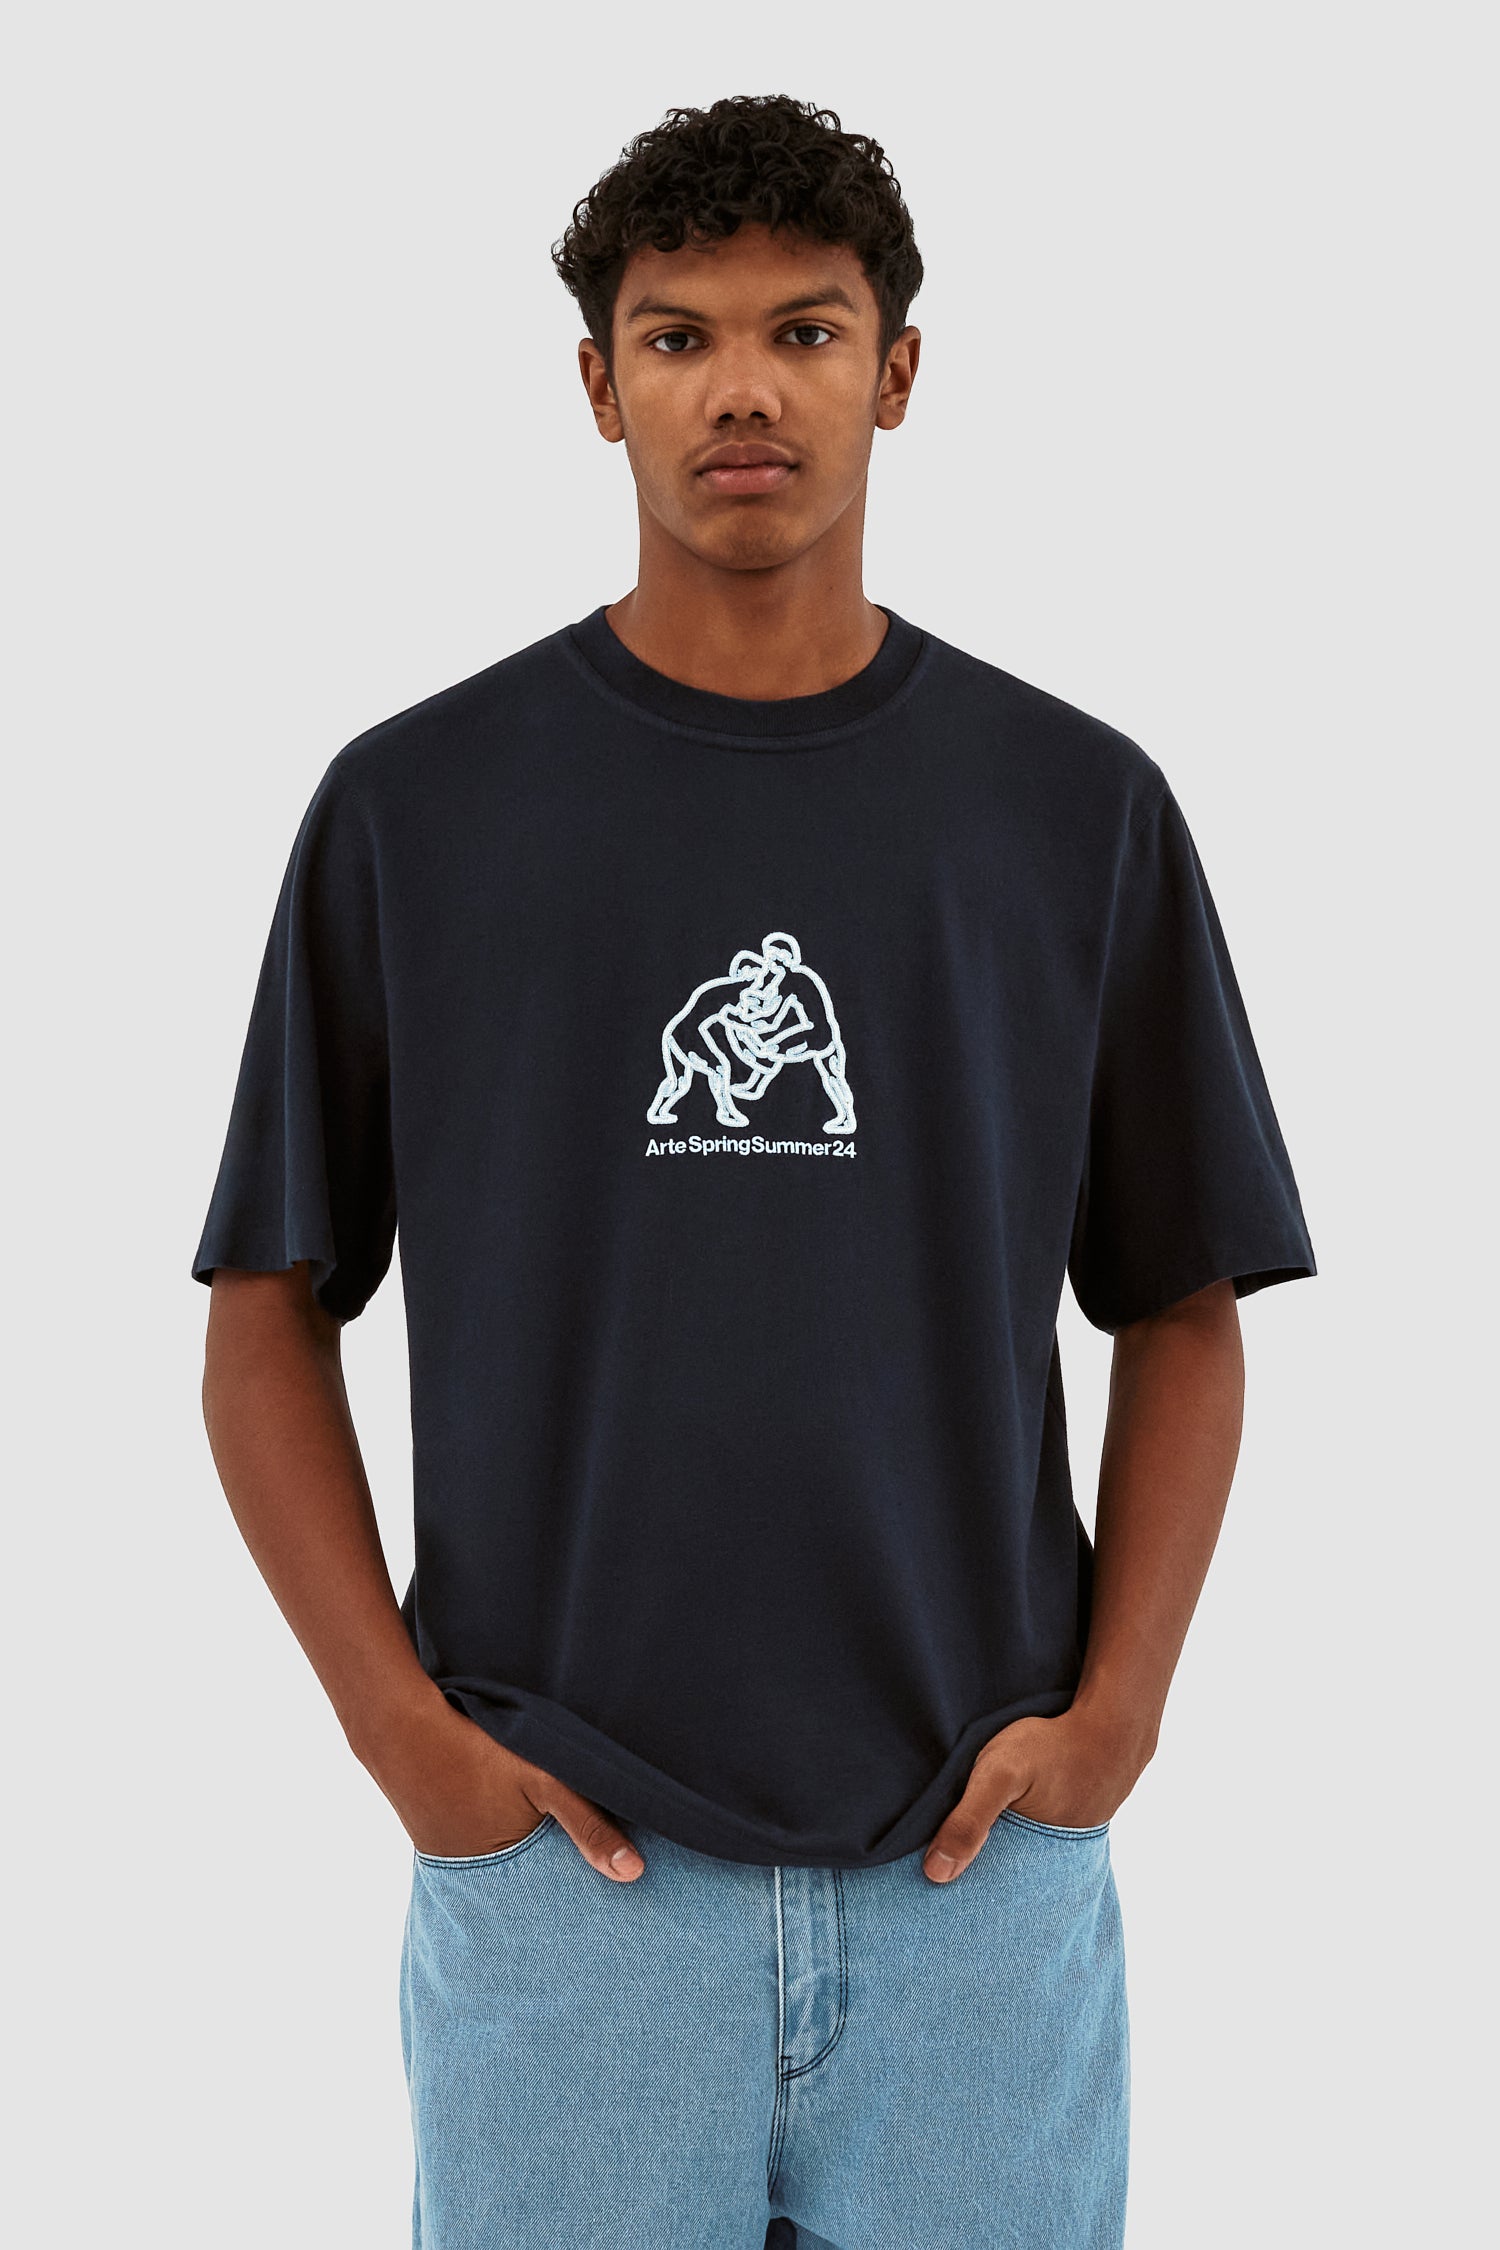 Teo Fighter Front T-shirt - Navy